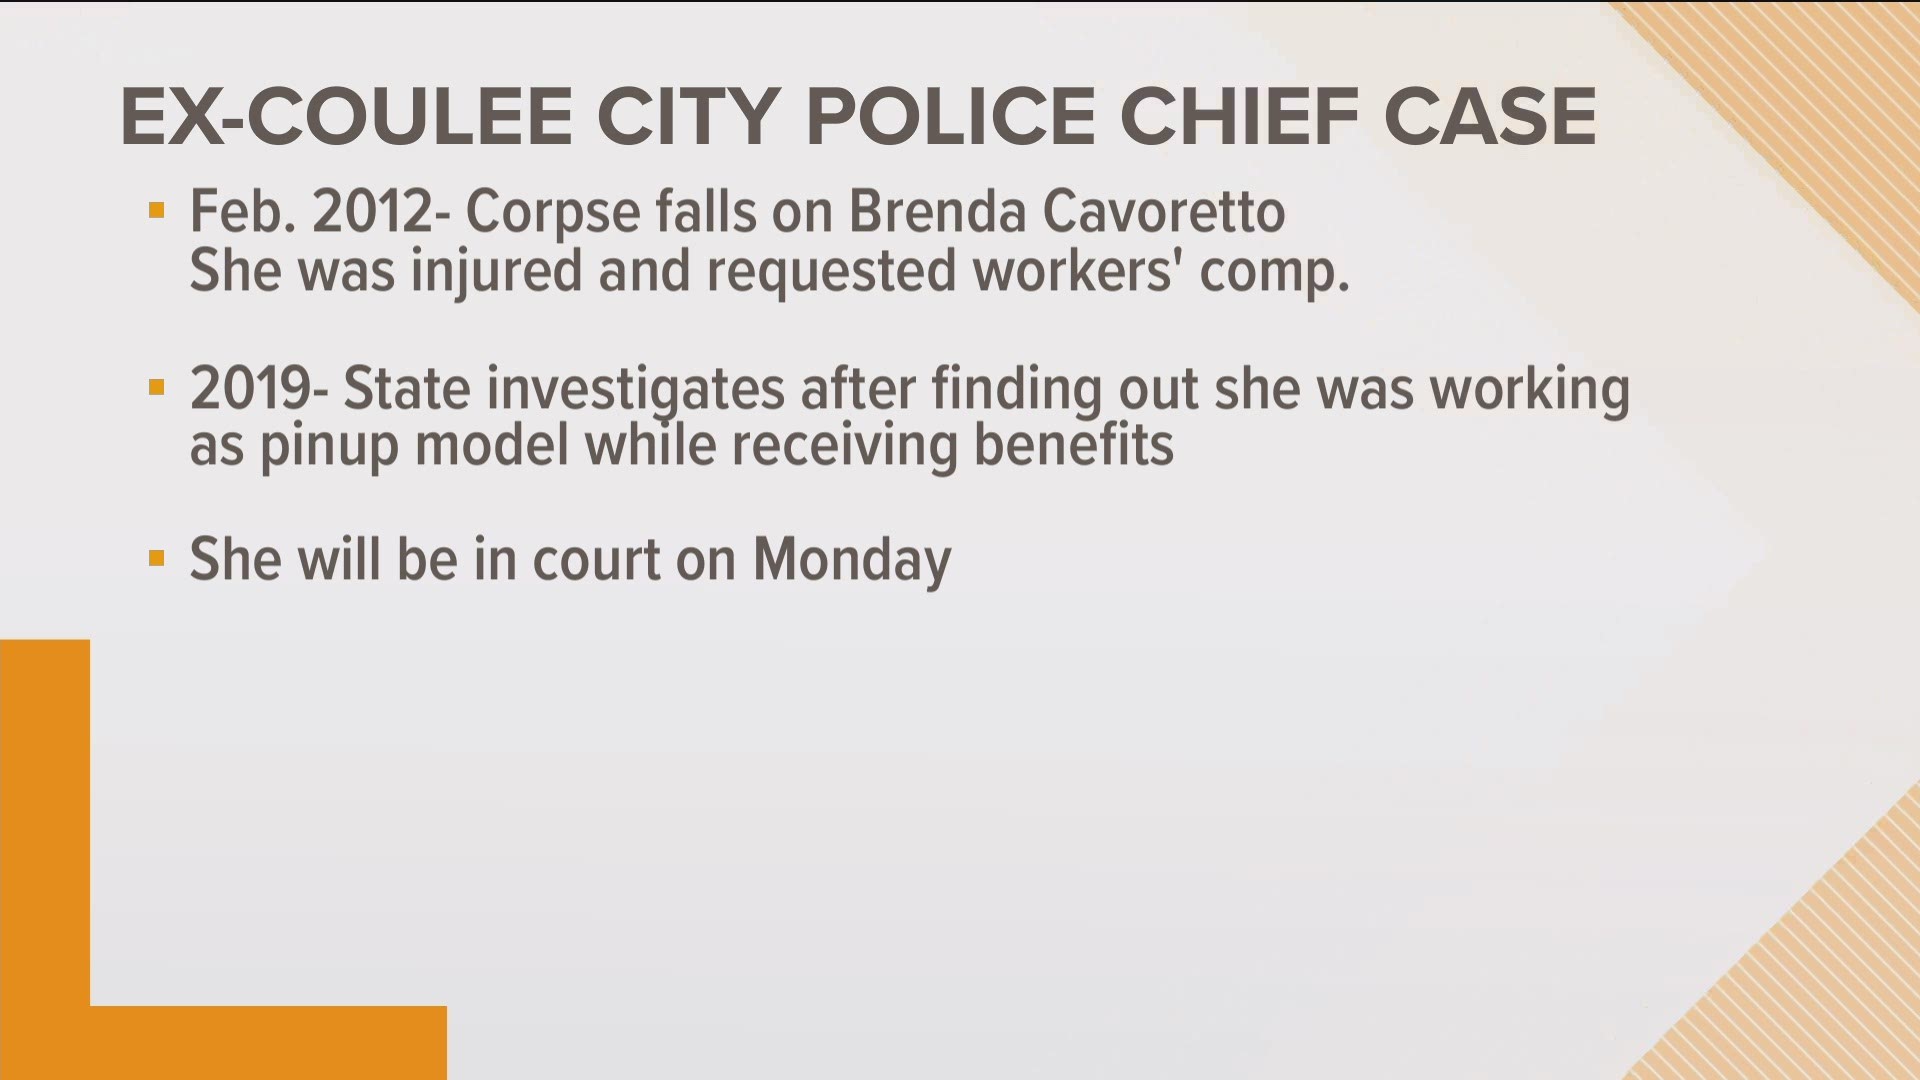 Brenda Lynn Cavoretto was injured when a 285-pound corpse fell on her during a police call in 2012, according to Washington state officials.